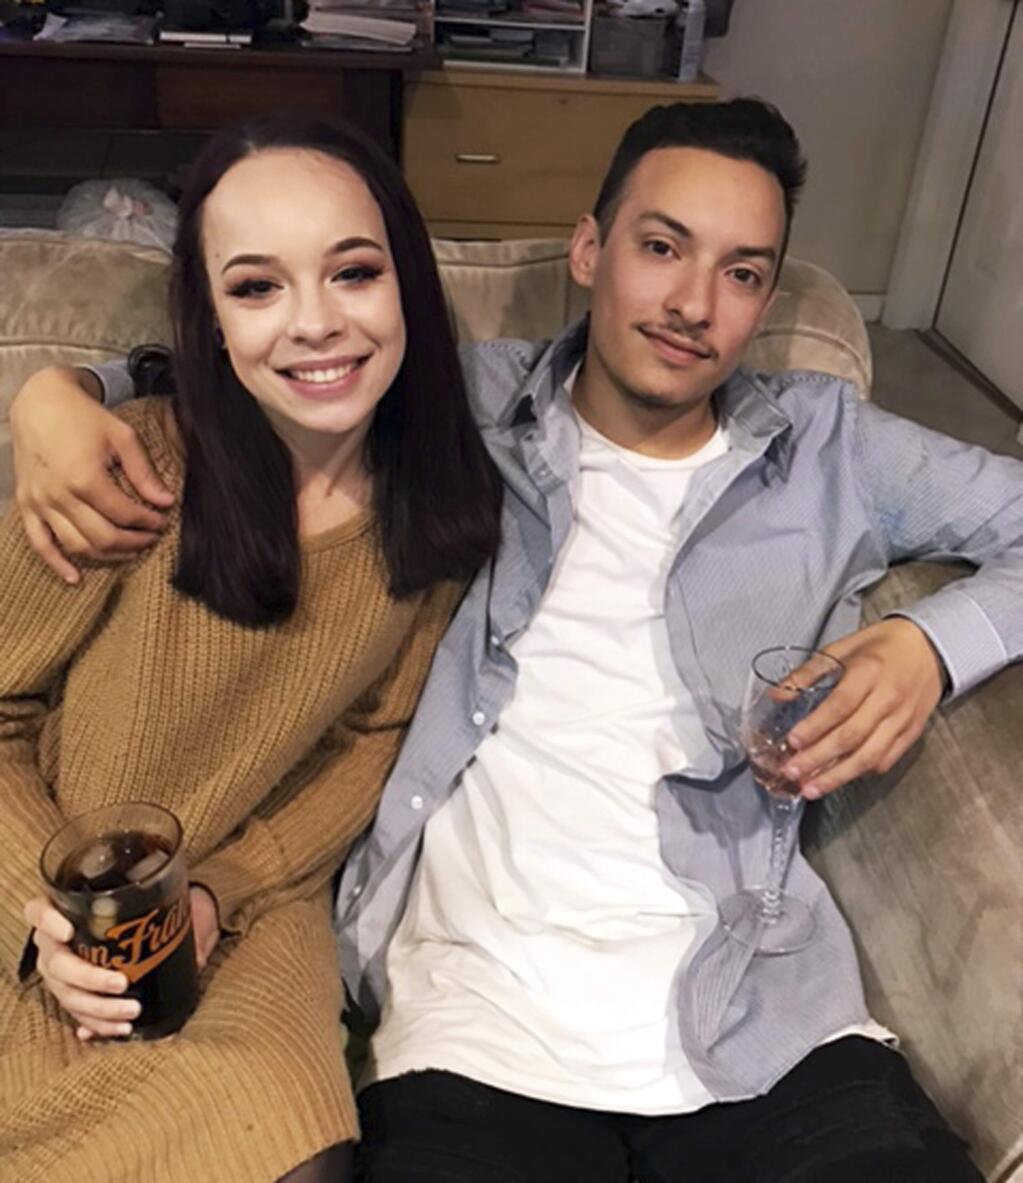 This undated photo provided by Kathy Vega shows Michela Gregory and Alex Vega. As of Tuesday, Dec. 6, 2016, Gregory was confirmed dead and Vega remained listed as missing in the disastrous fire that swept through an Oakland, Calif., warehouse party, killing dozens. (Kathy Vega via AP)